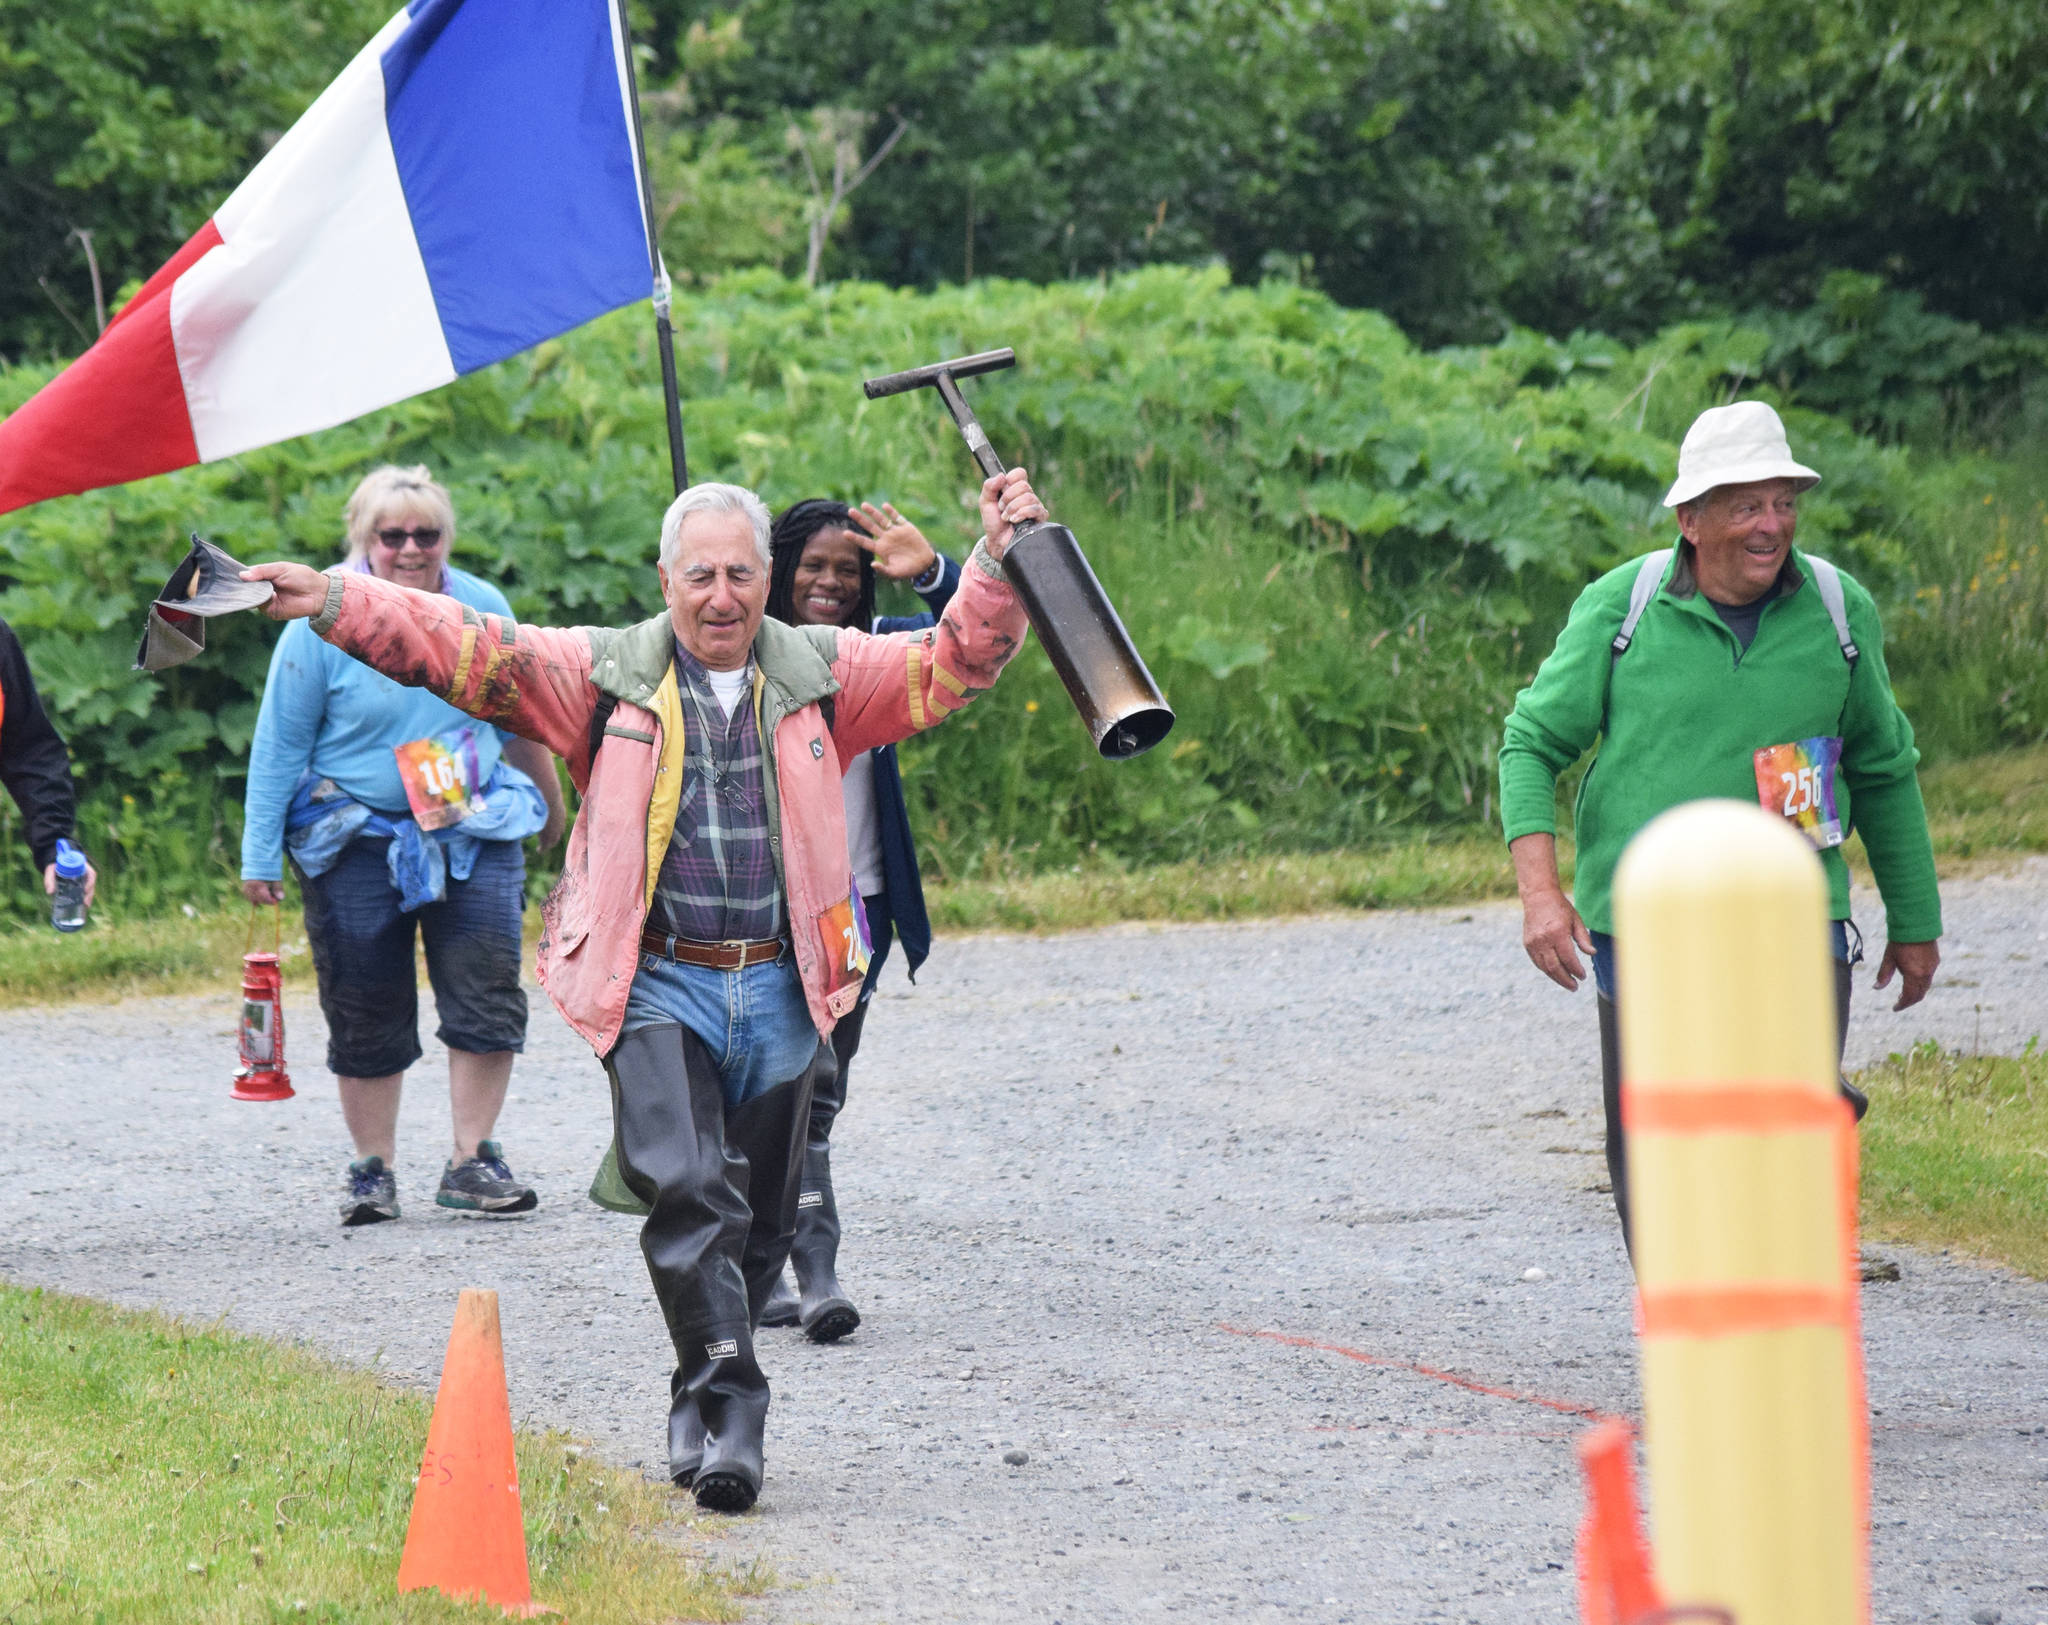 French walkers Pierre Morell (right) and Jean-Phillip Hullen approach the finish line Saturday at the Ninilchik Clam Scramble Mud and Obstacle Run in Ninilchik, Alaska. (Photo by Joey Klecka/Peninsula Clarion)